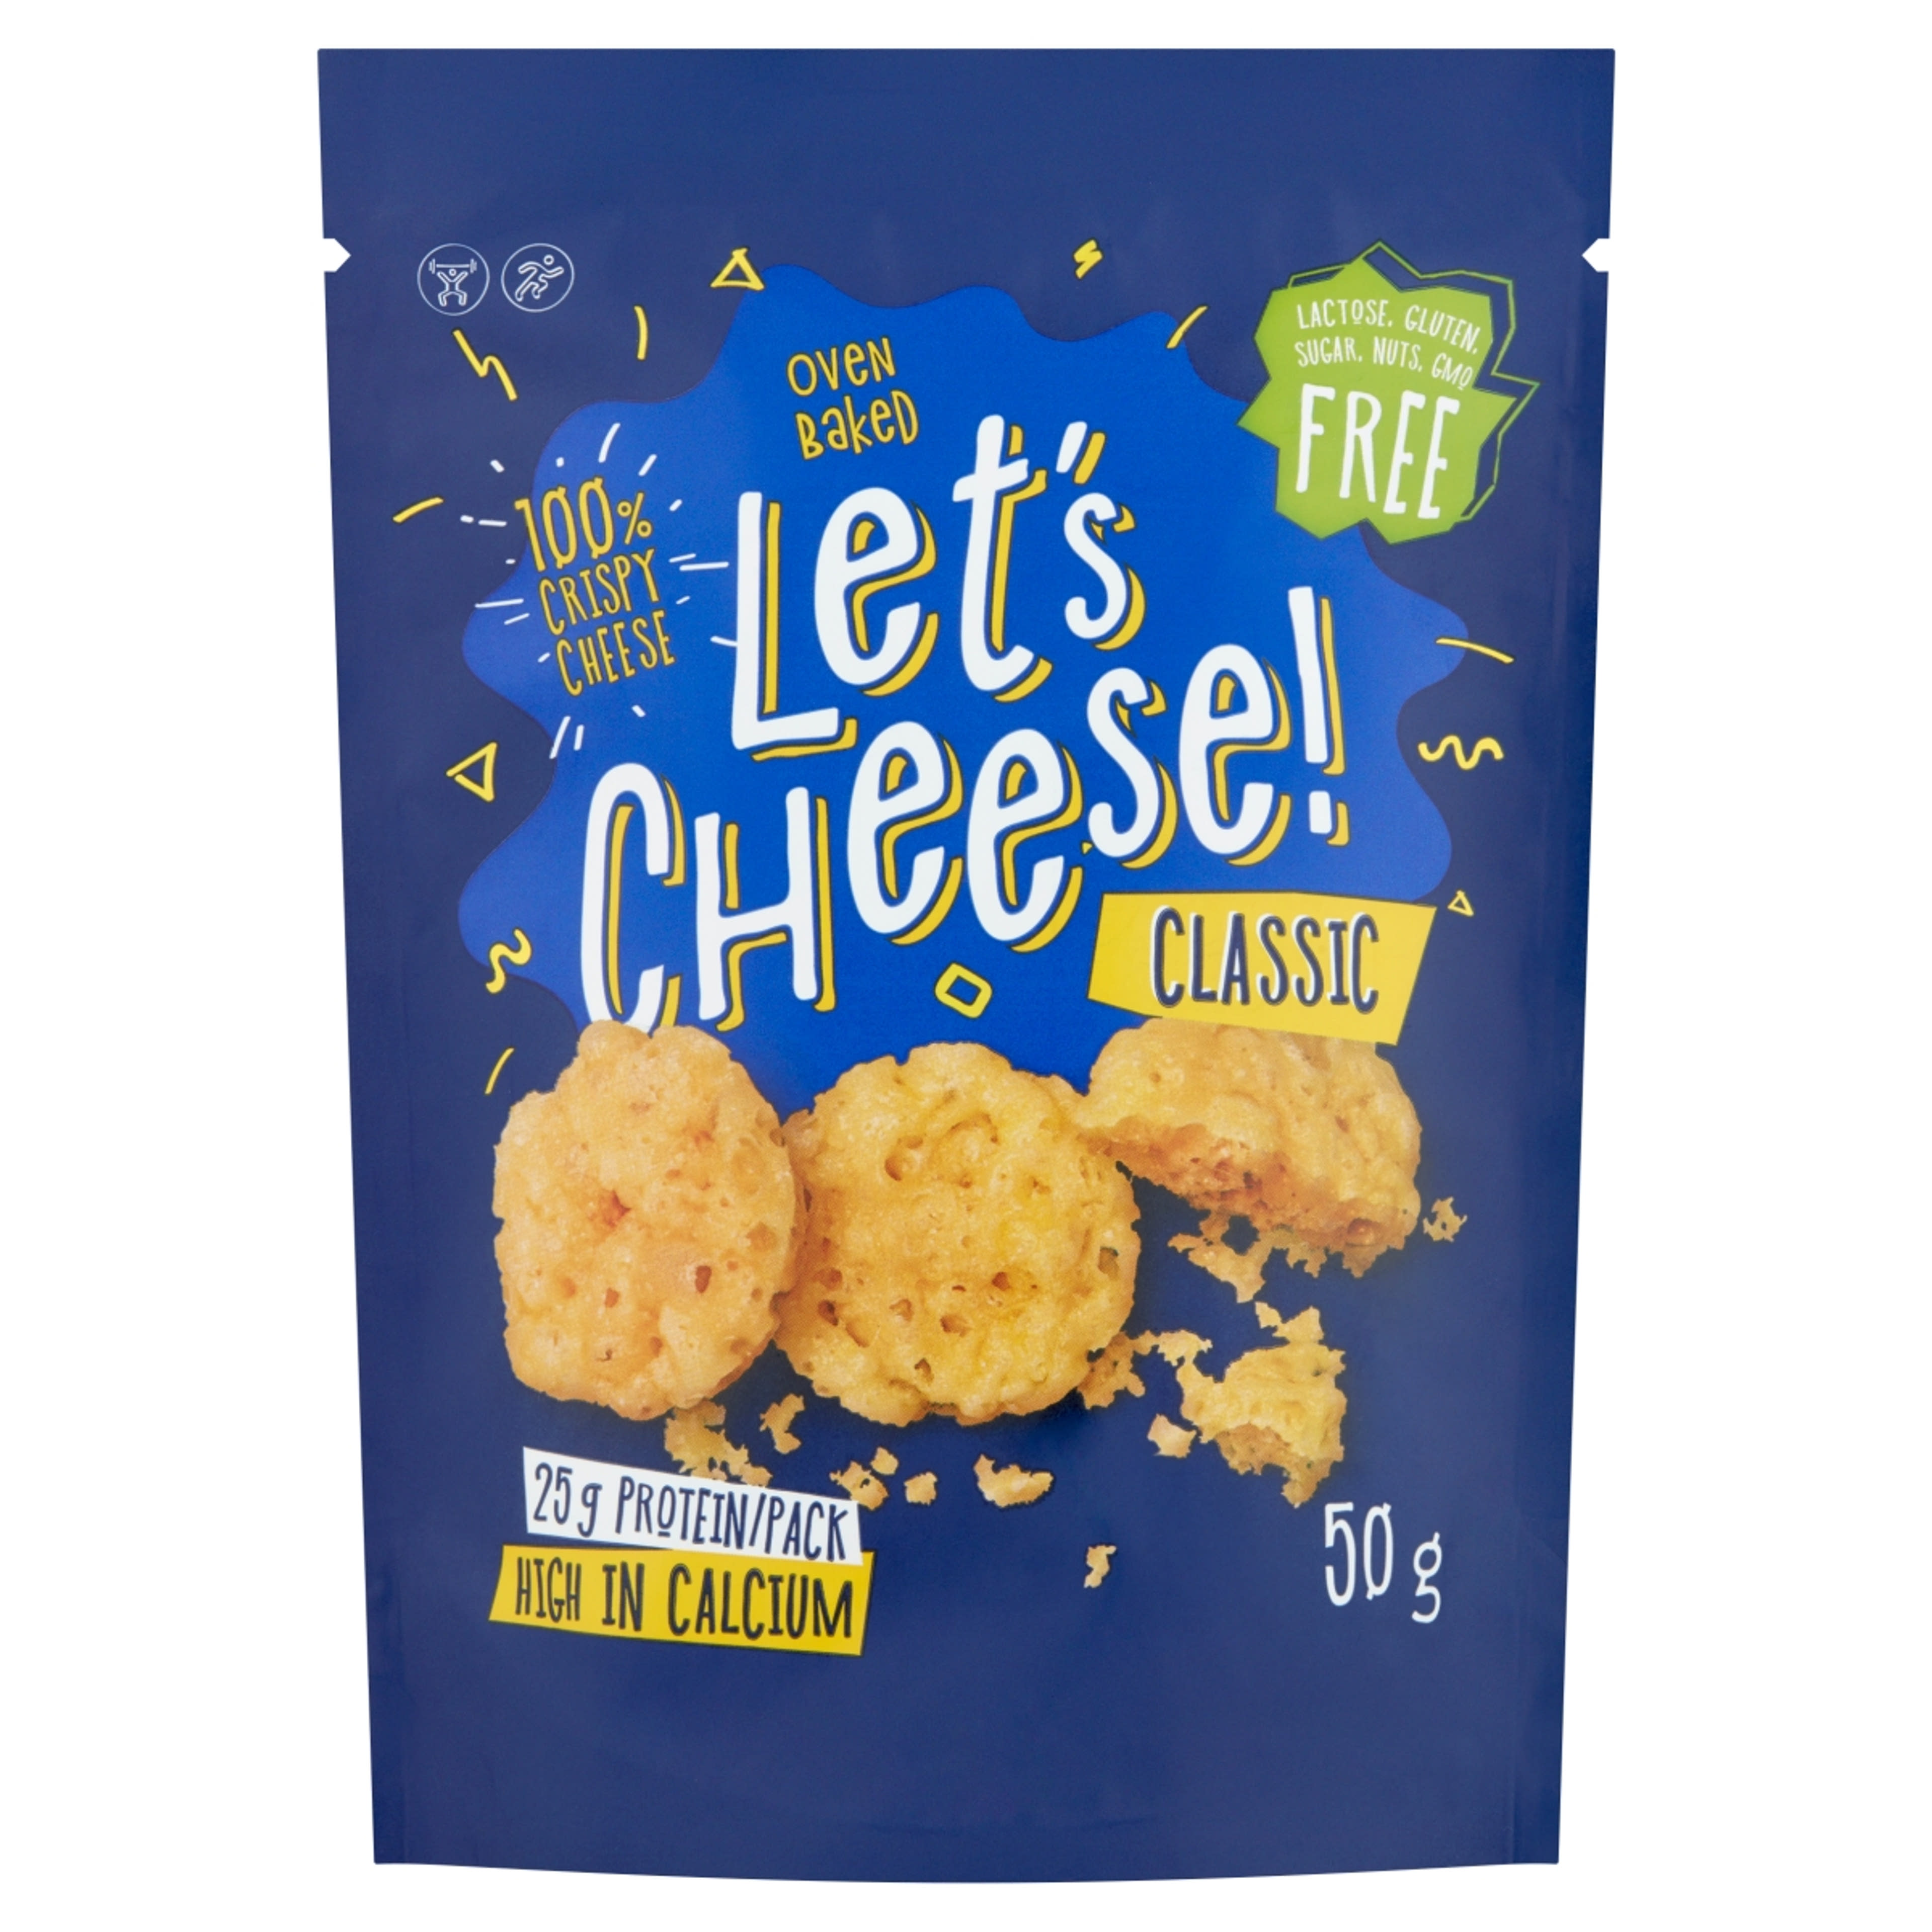 Let's Cheese Classic sajt snack - 50 g